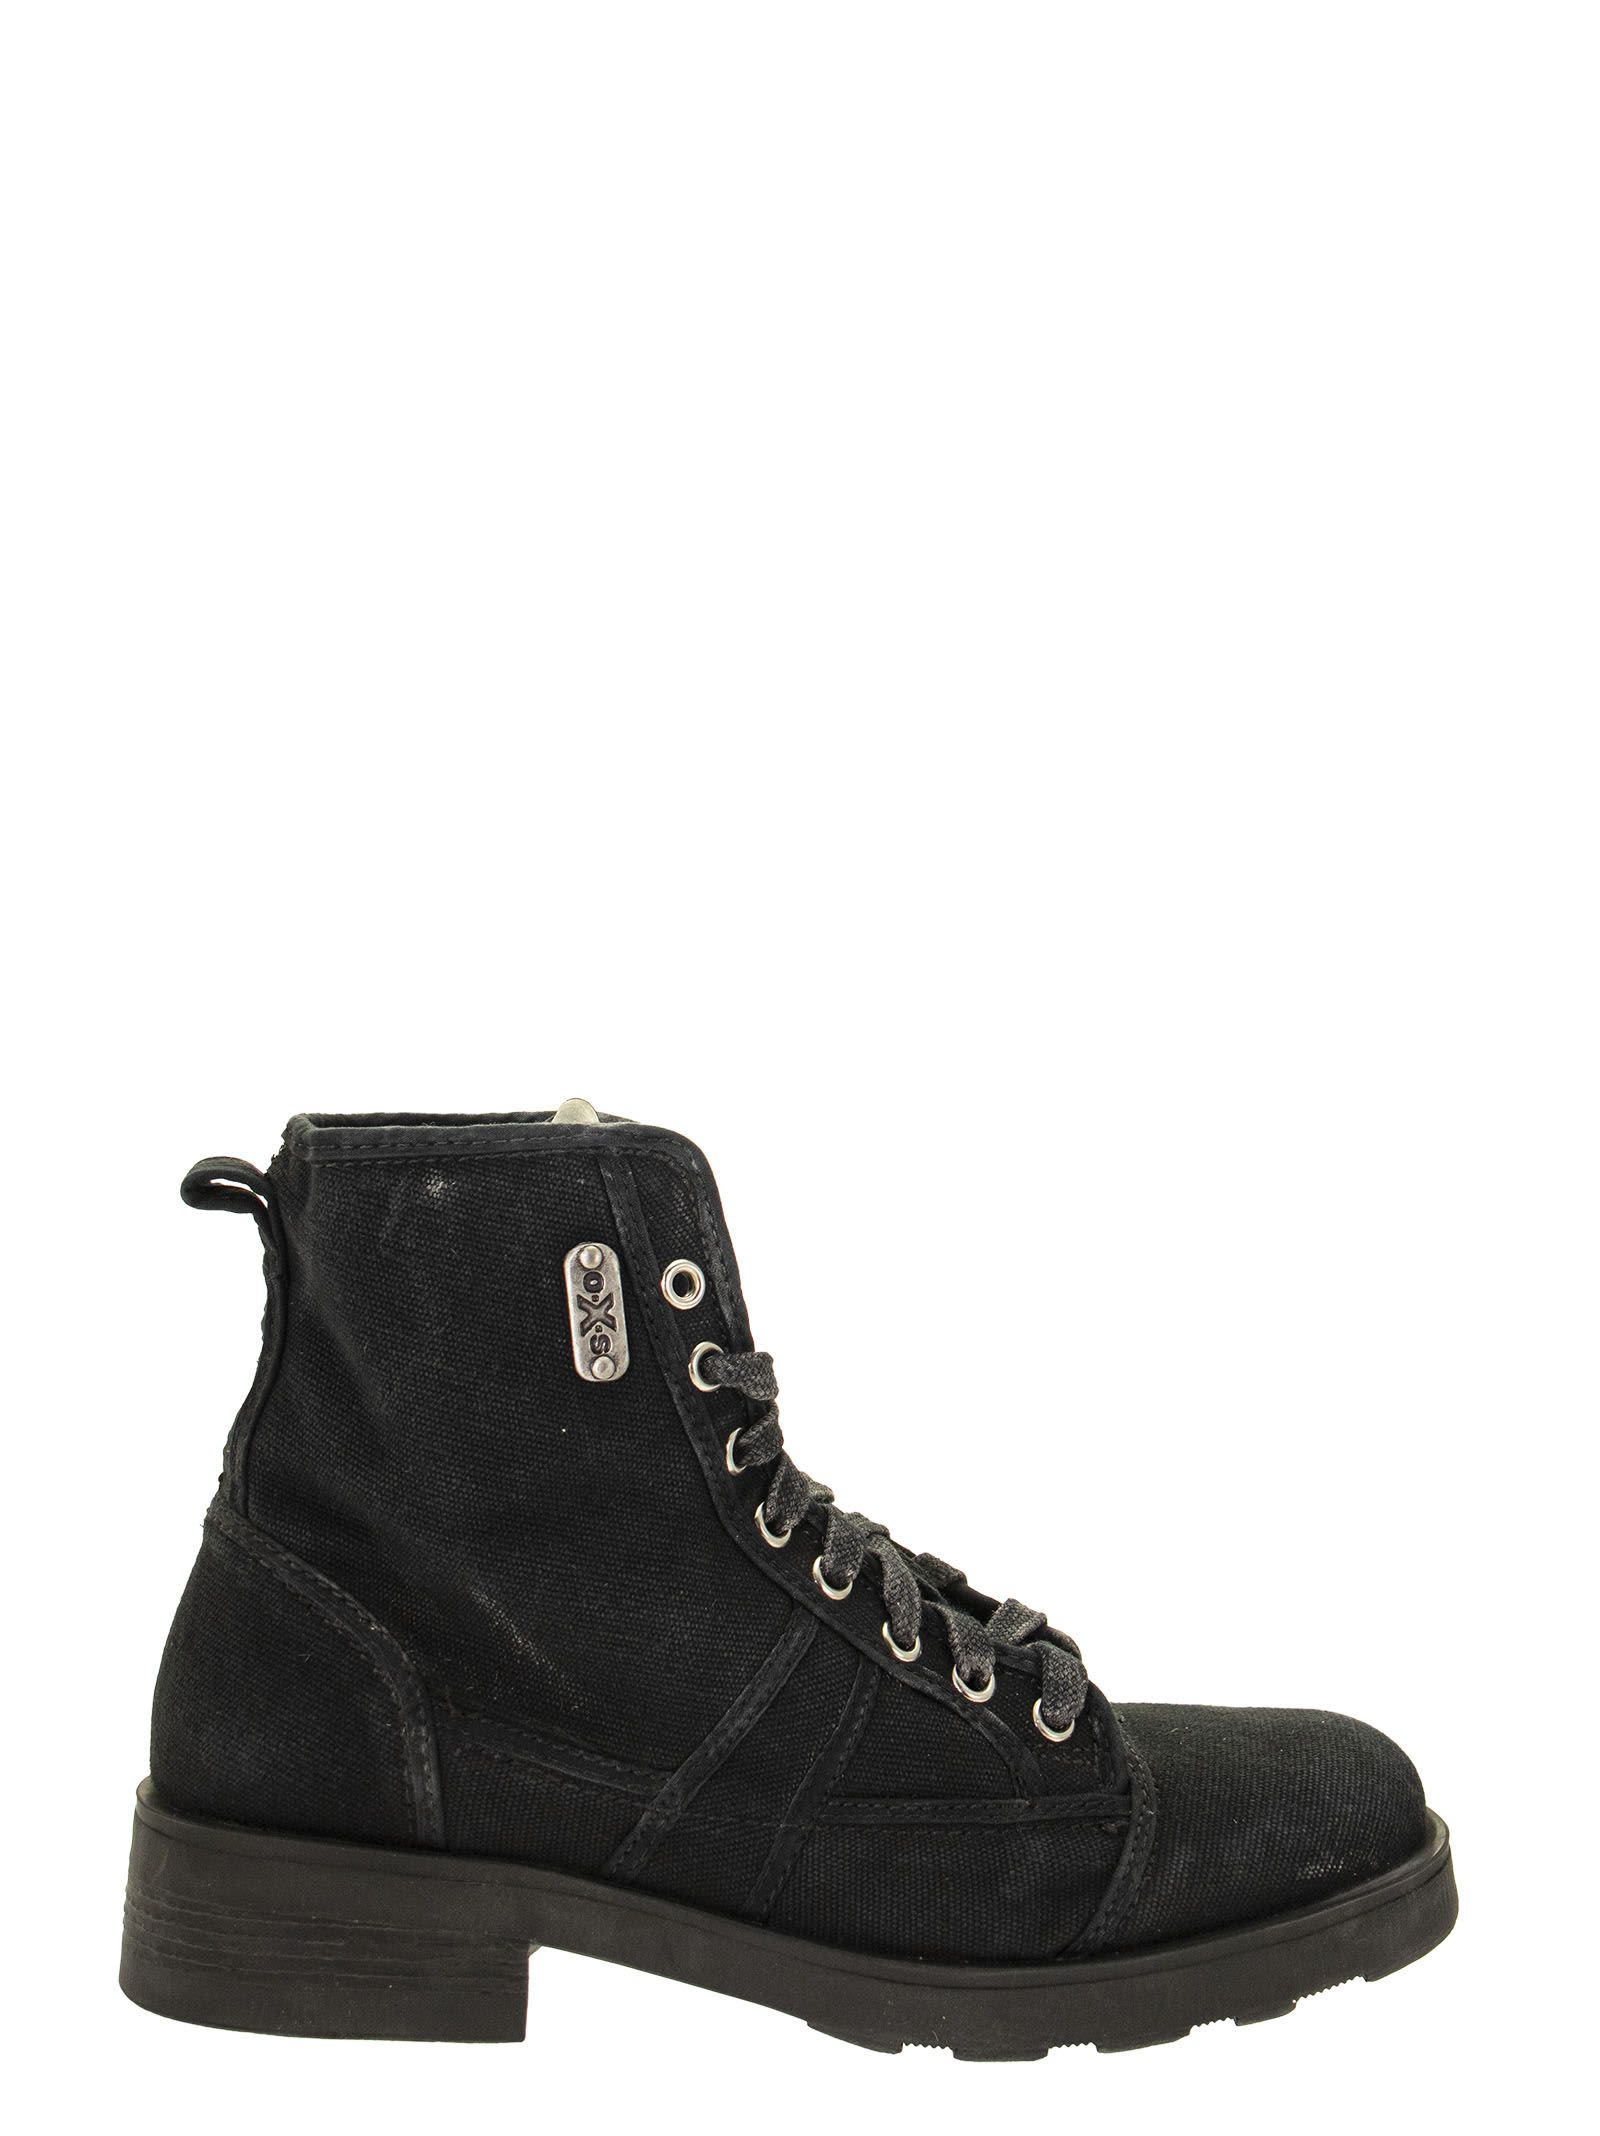 OXS Frank 1120 - Laced Ankle Boot